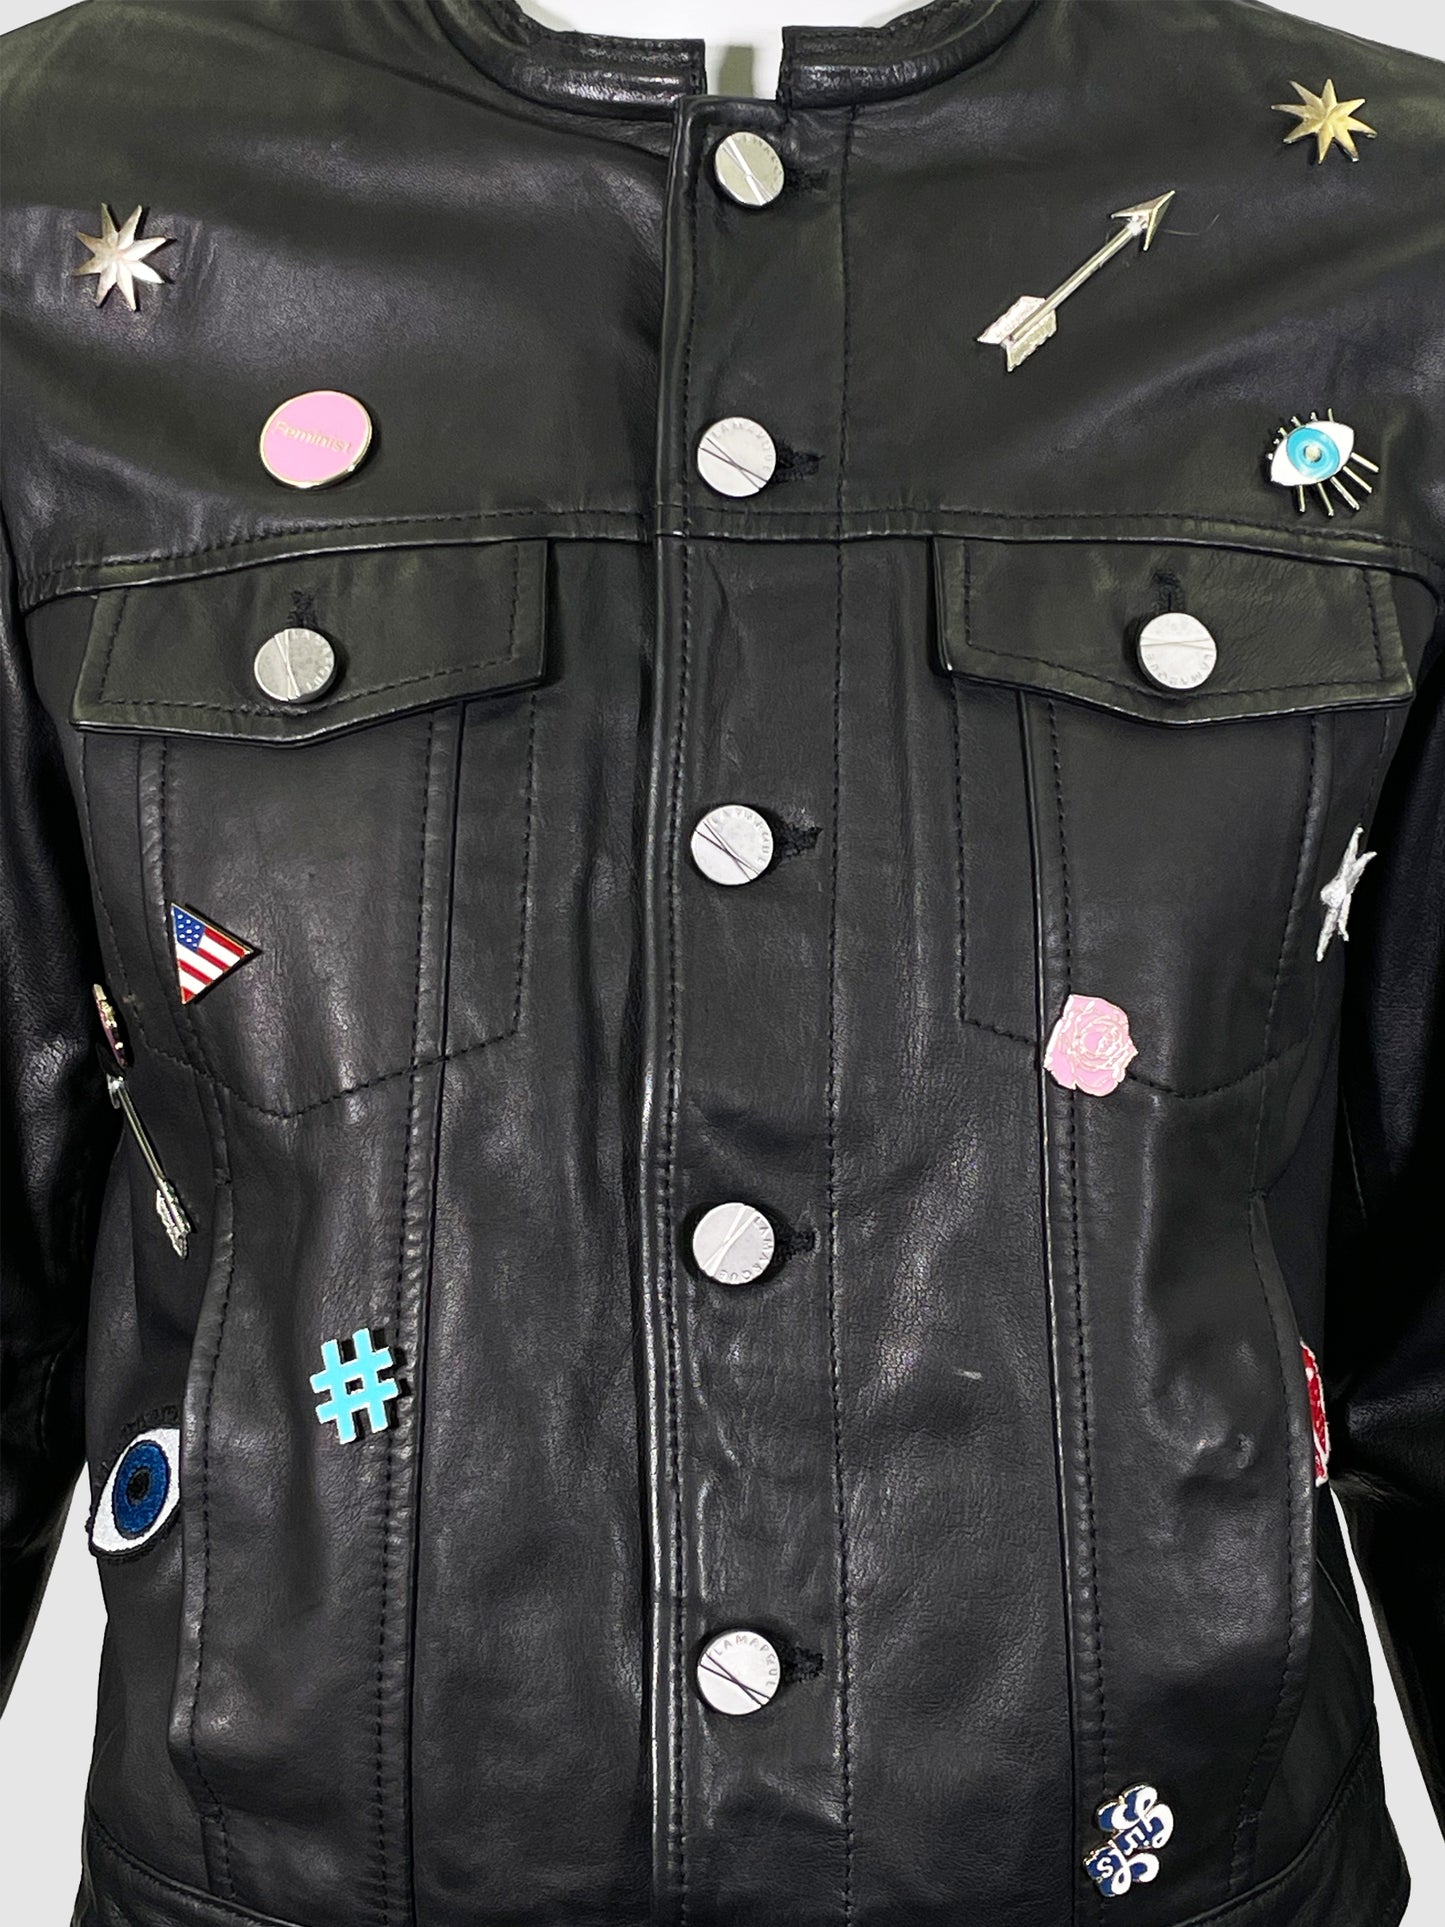 Lamarque Leather Jacket with Pins - Size S